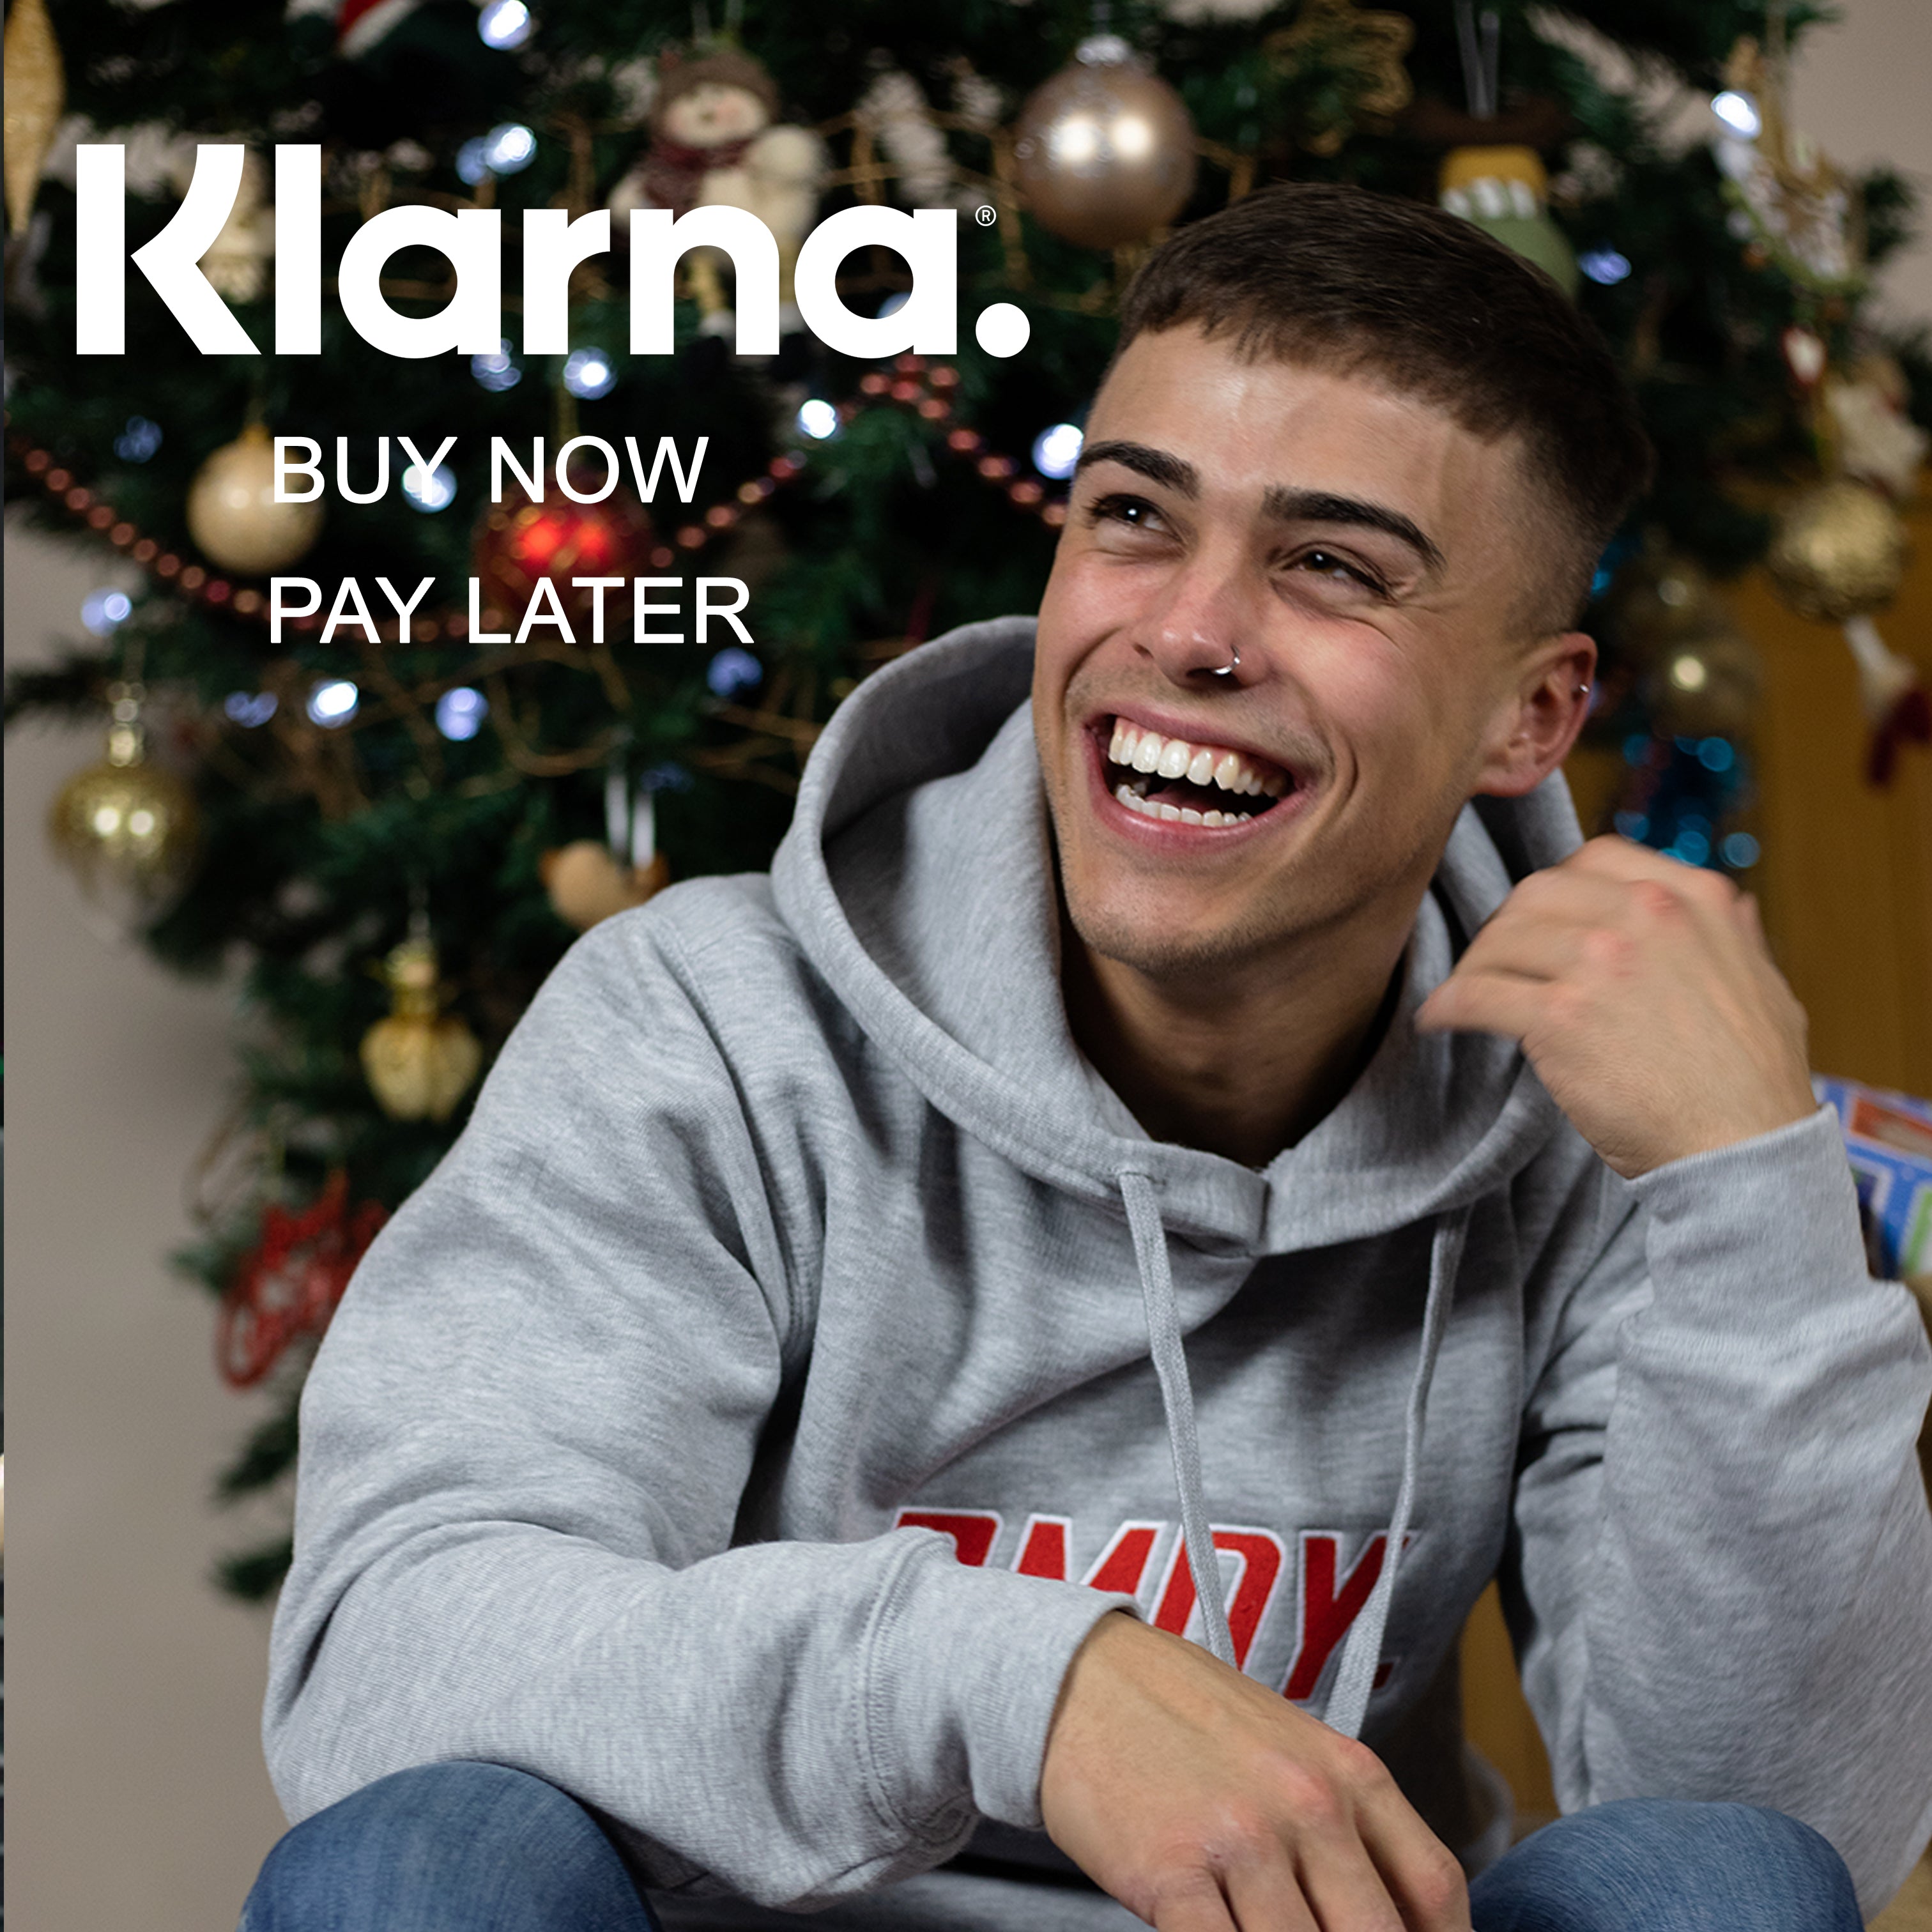 Klarna - Buy Now Pay Later This Christmas